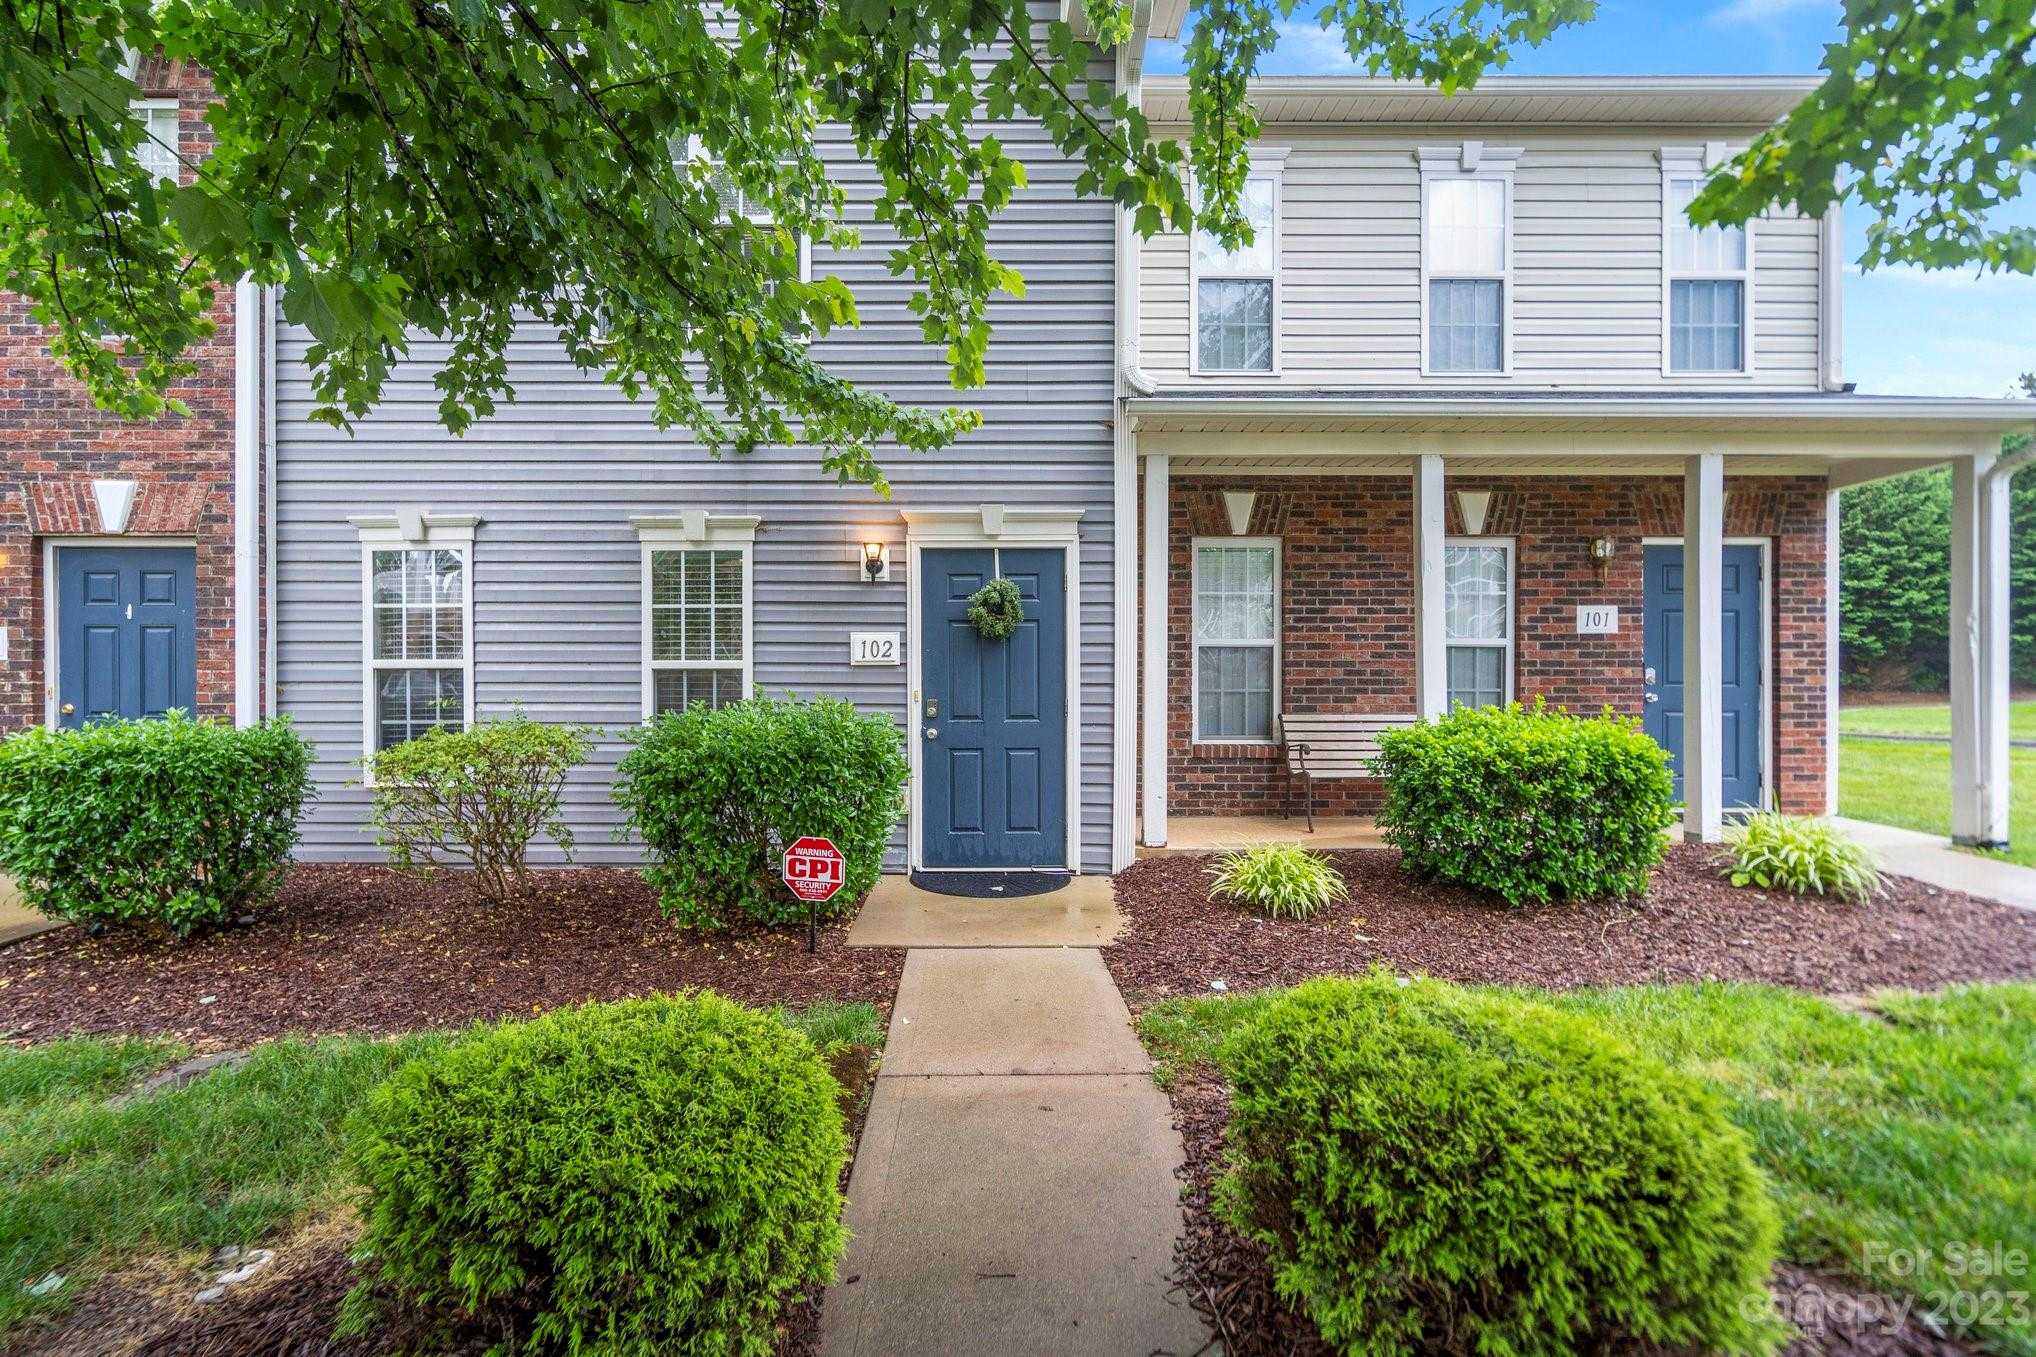 View Mooresville, NC 28115 townhome